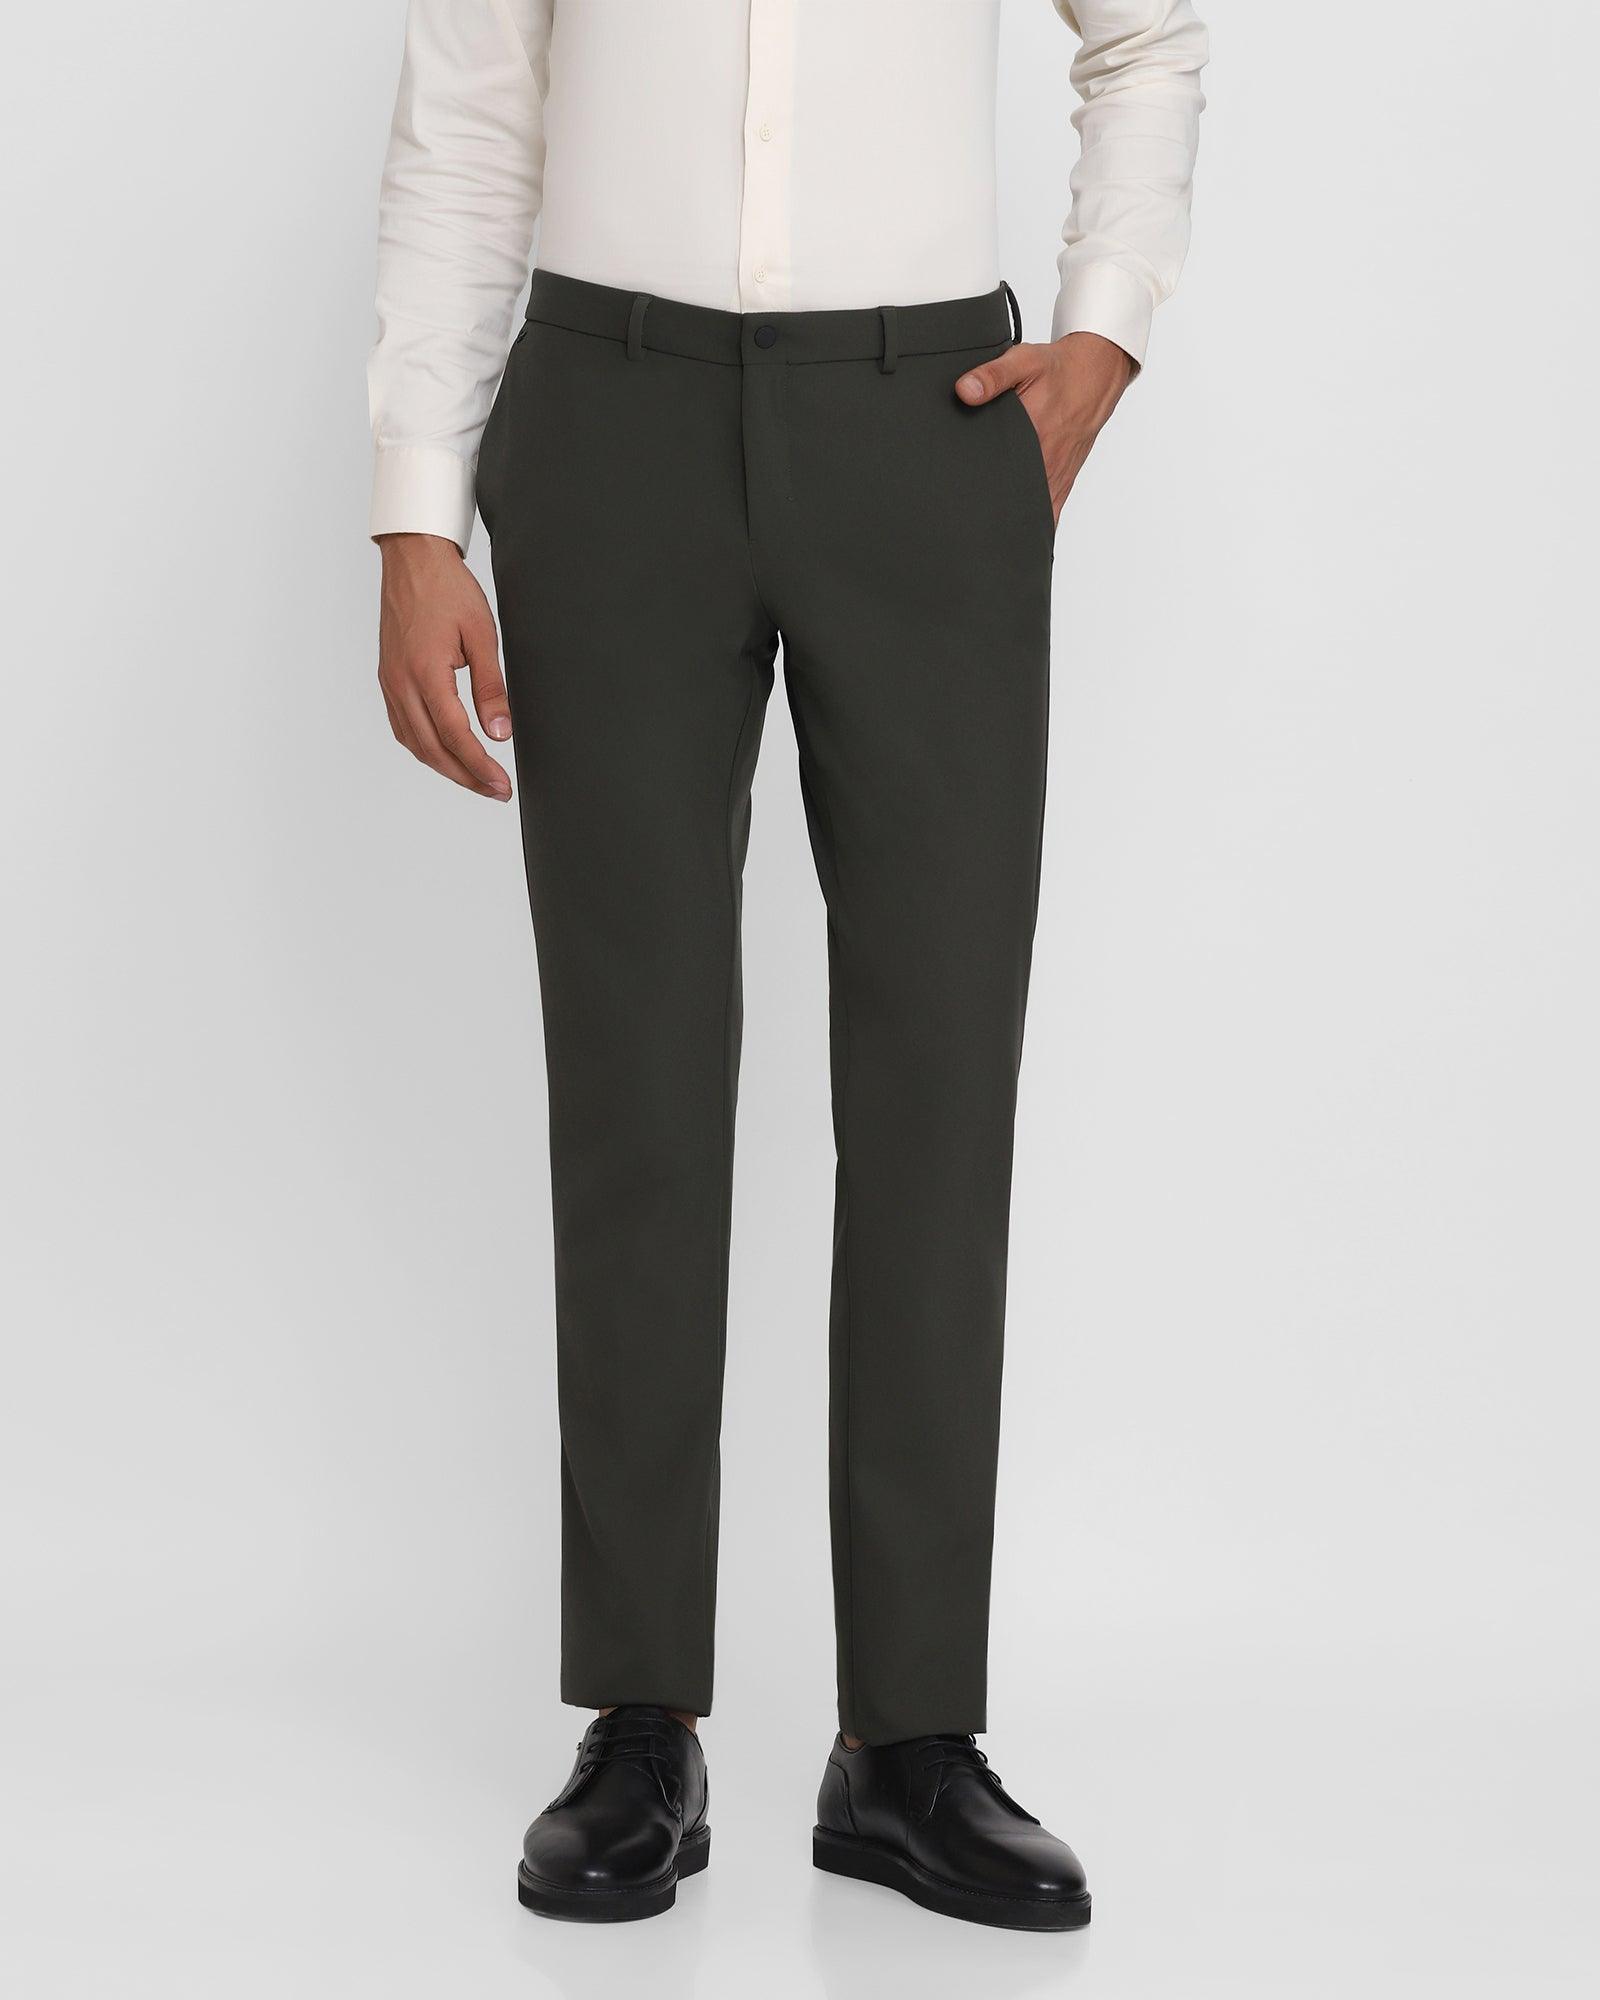 TechPro Slim Fit B-91 Formal Olive Solid Trouser - Ashley